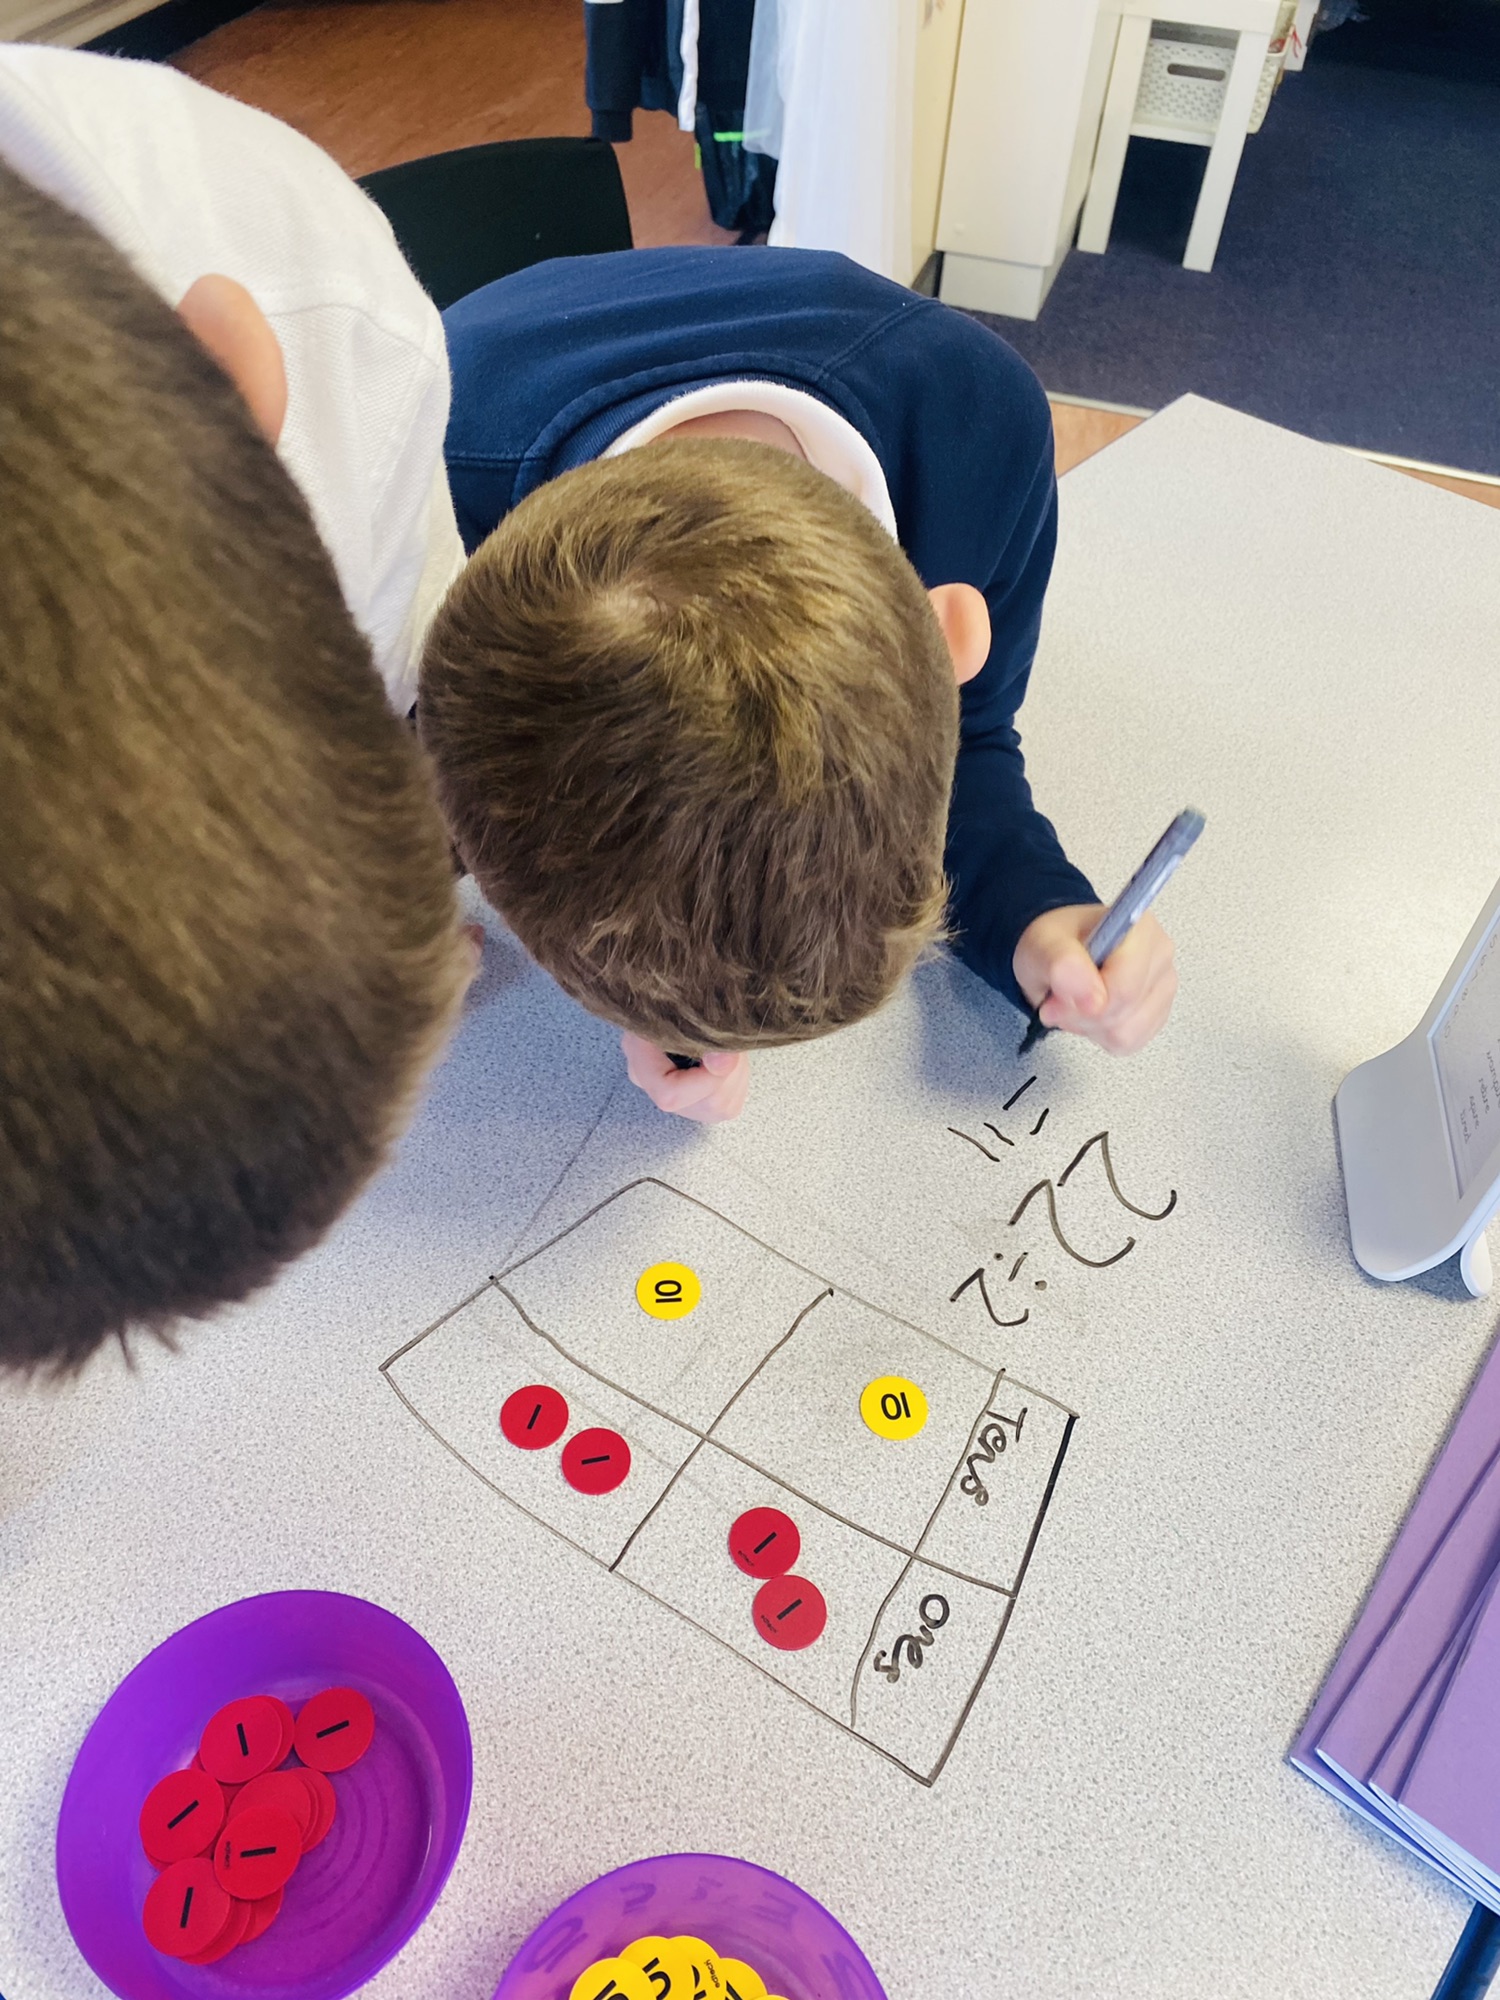 Children solving division problems using place value charts on the tables